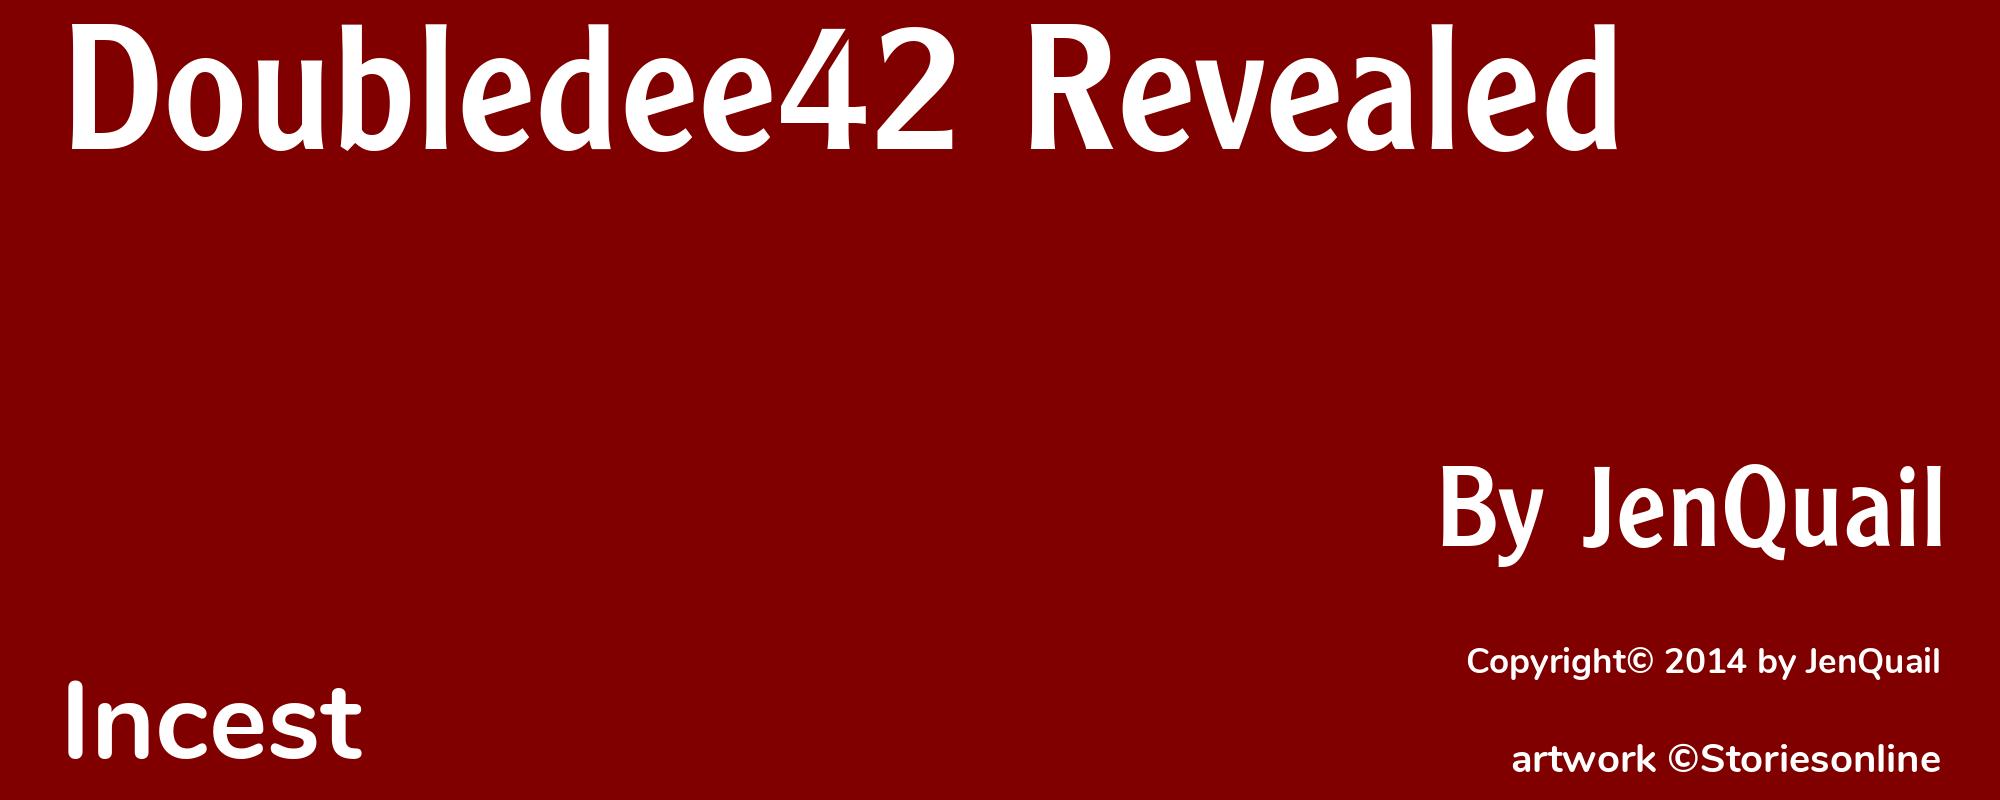 Doubledee42 Revealed - Cover